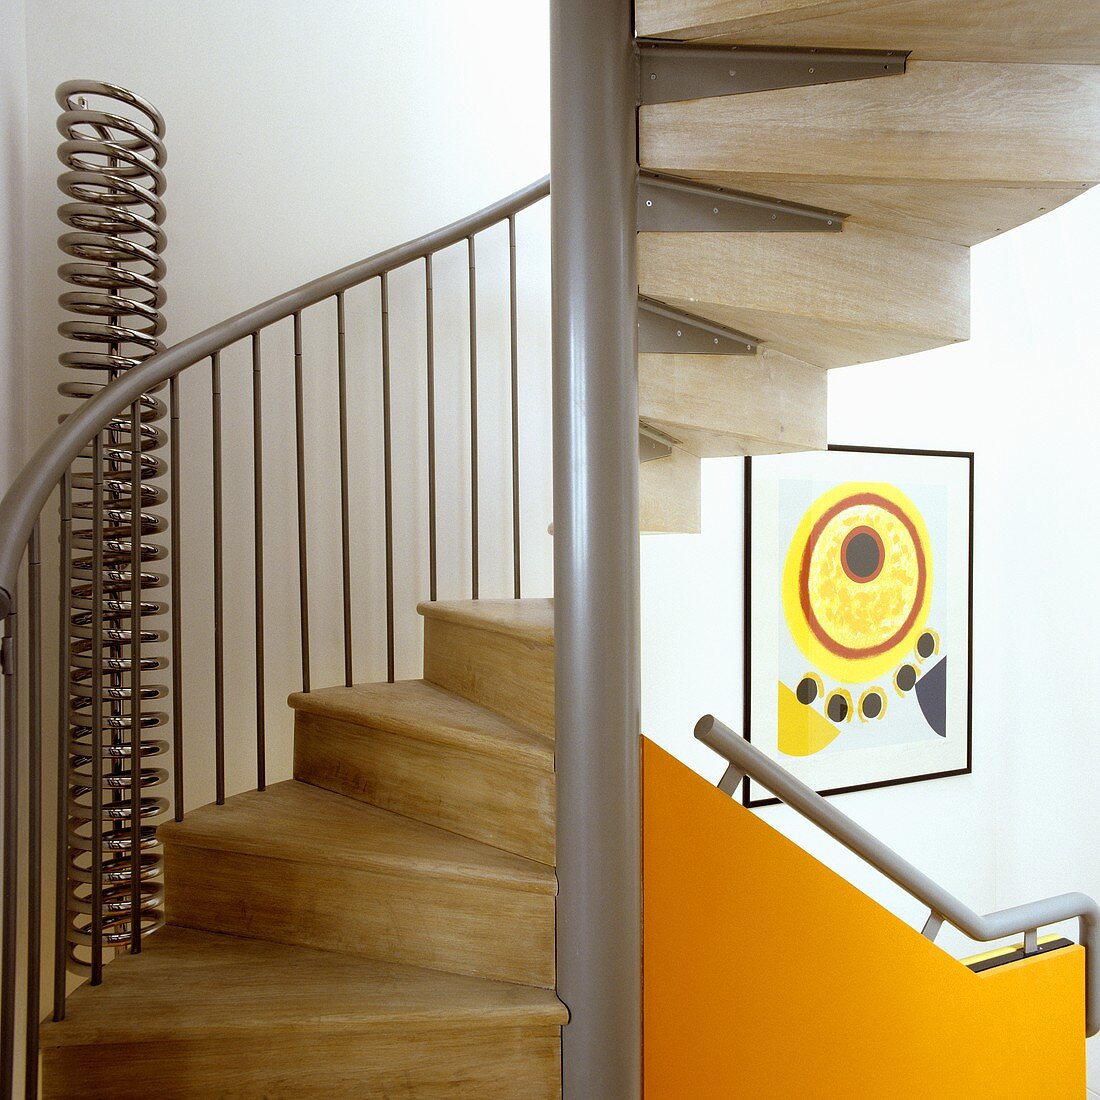 A spiral staircase with a metal frame and wooden stairs and a handrail on an orange-colored panel